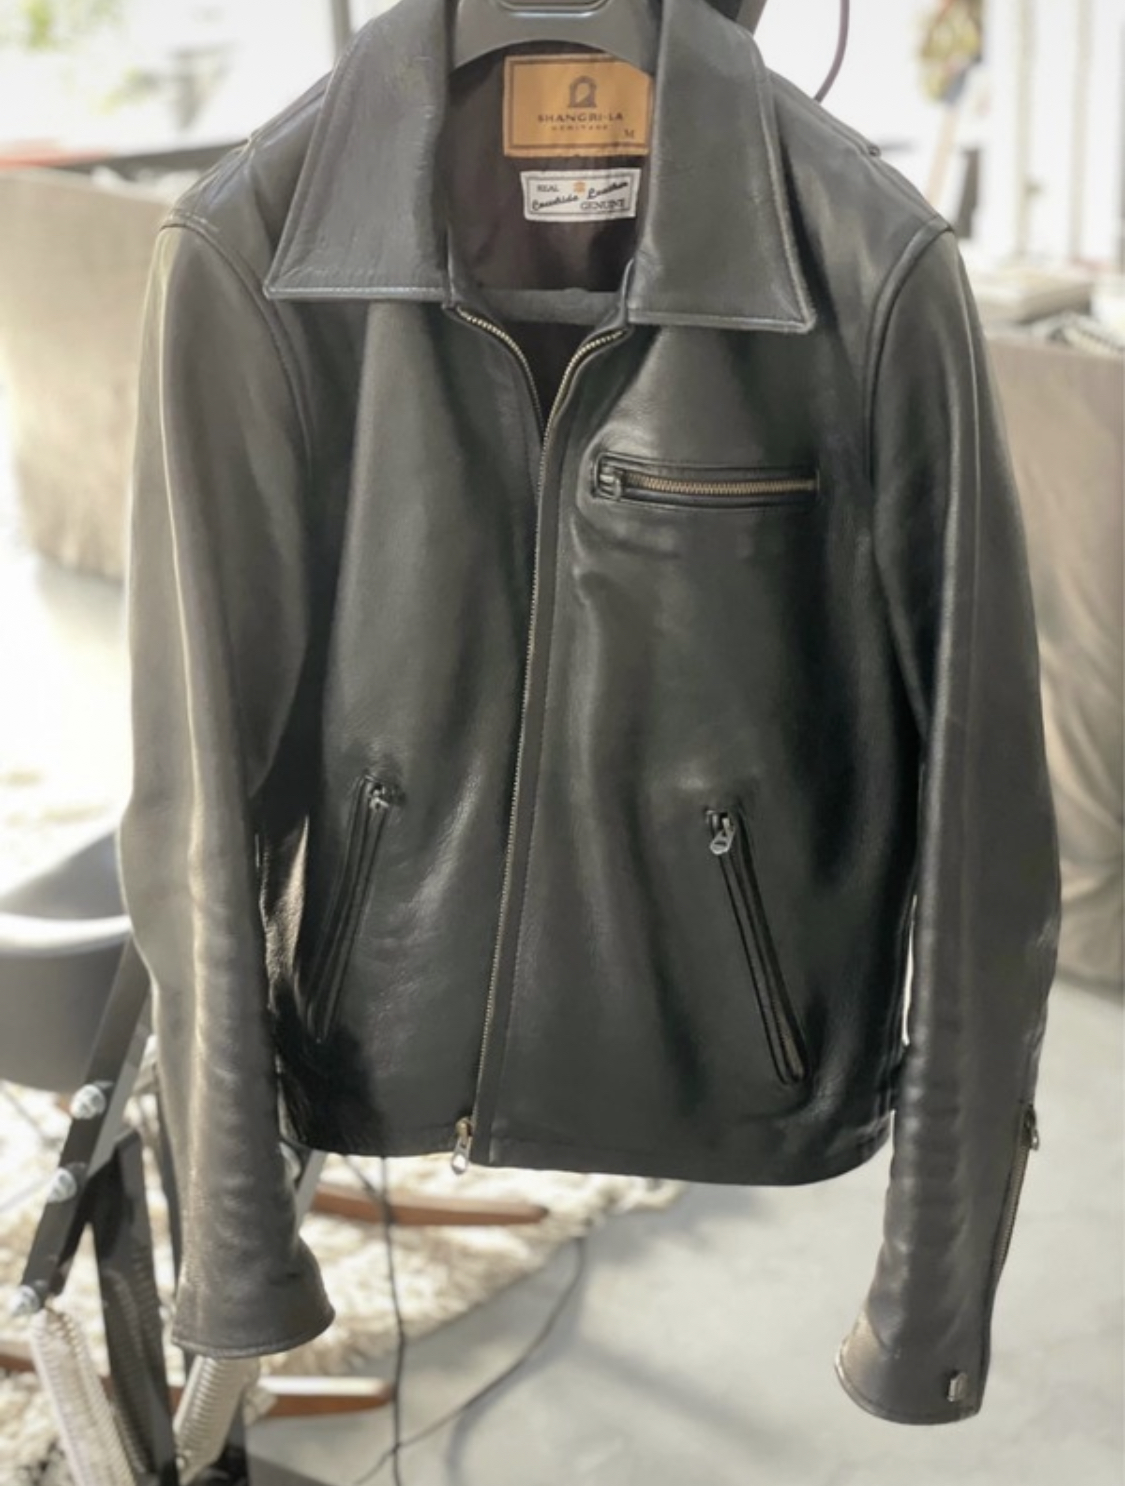 Thoughts on Shangri-La leather jackets? | Page 2 | The Fedora Lounge